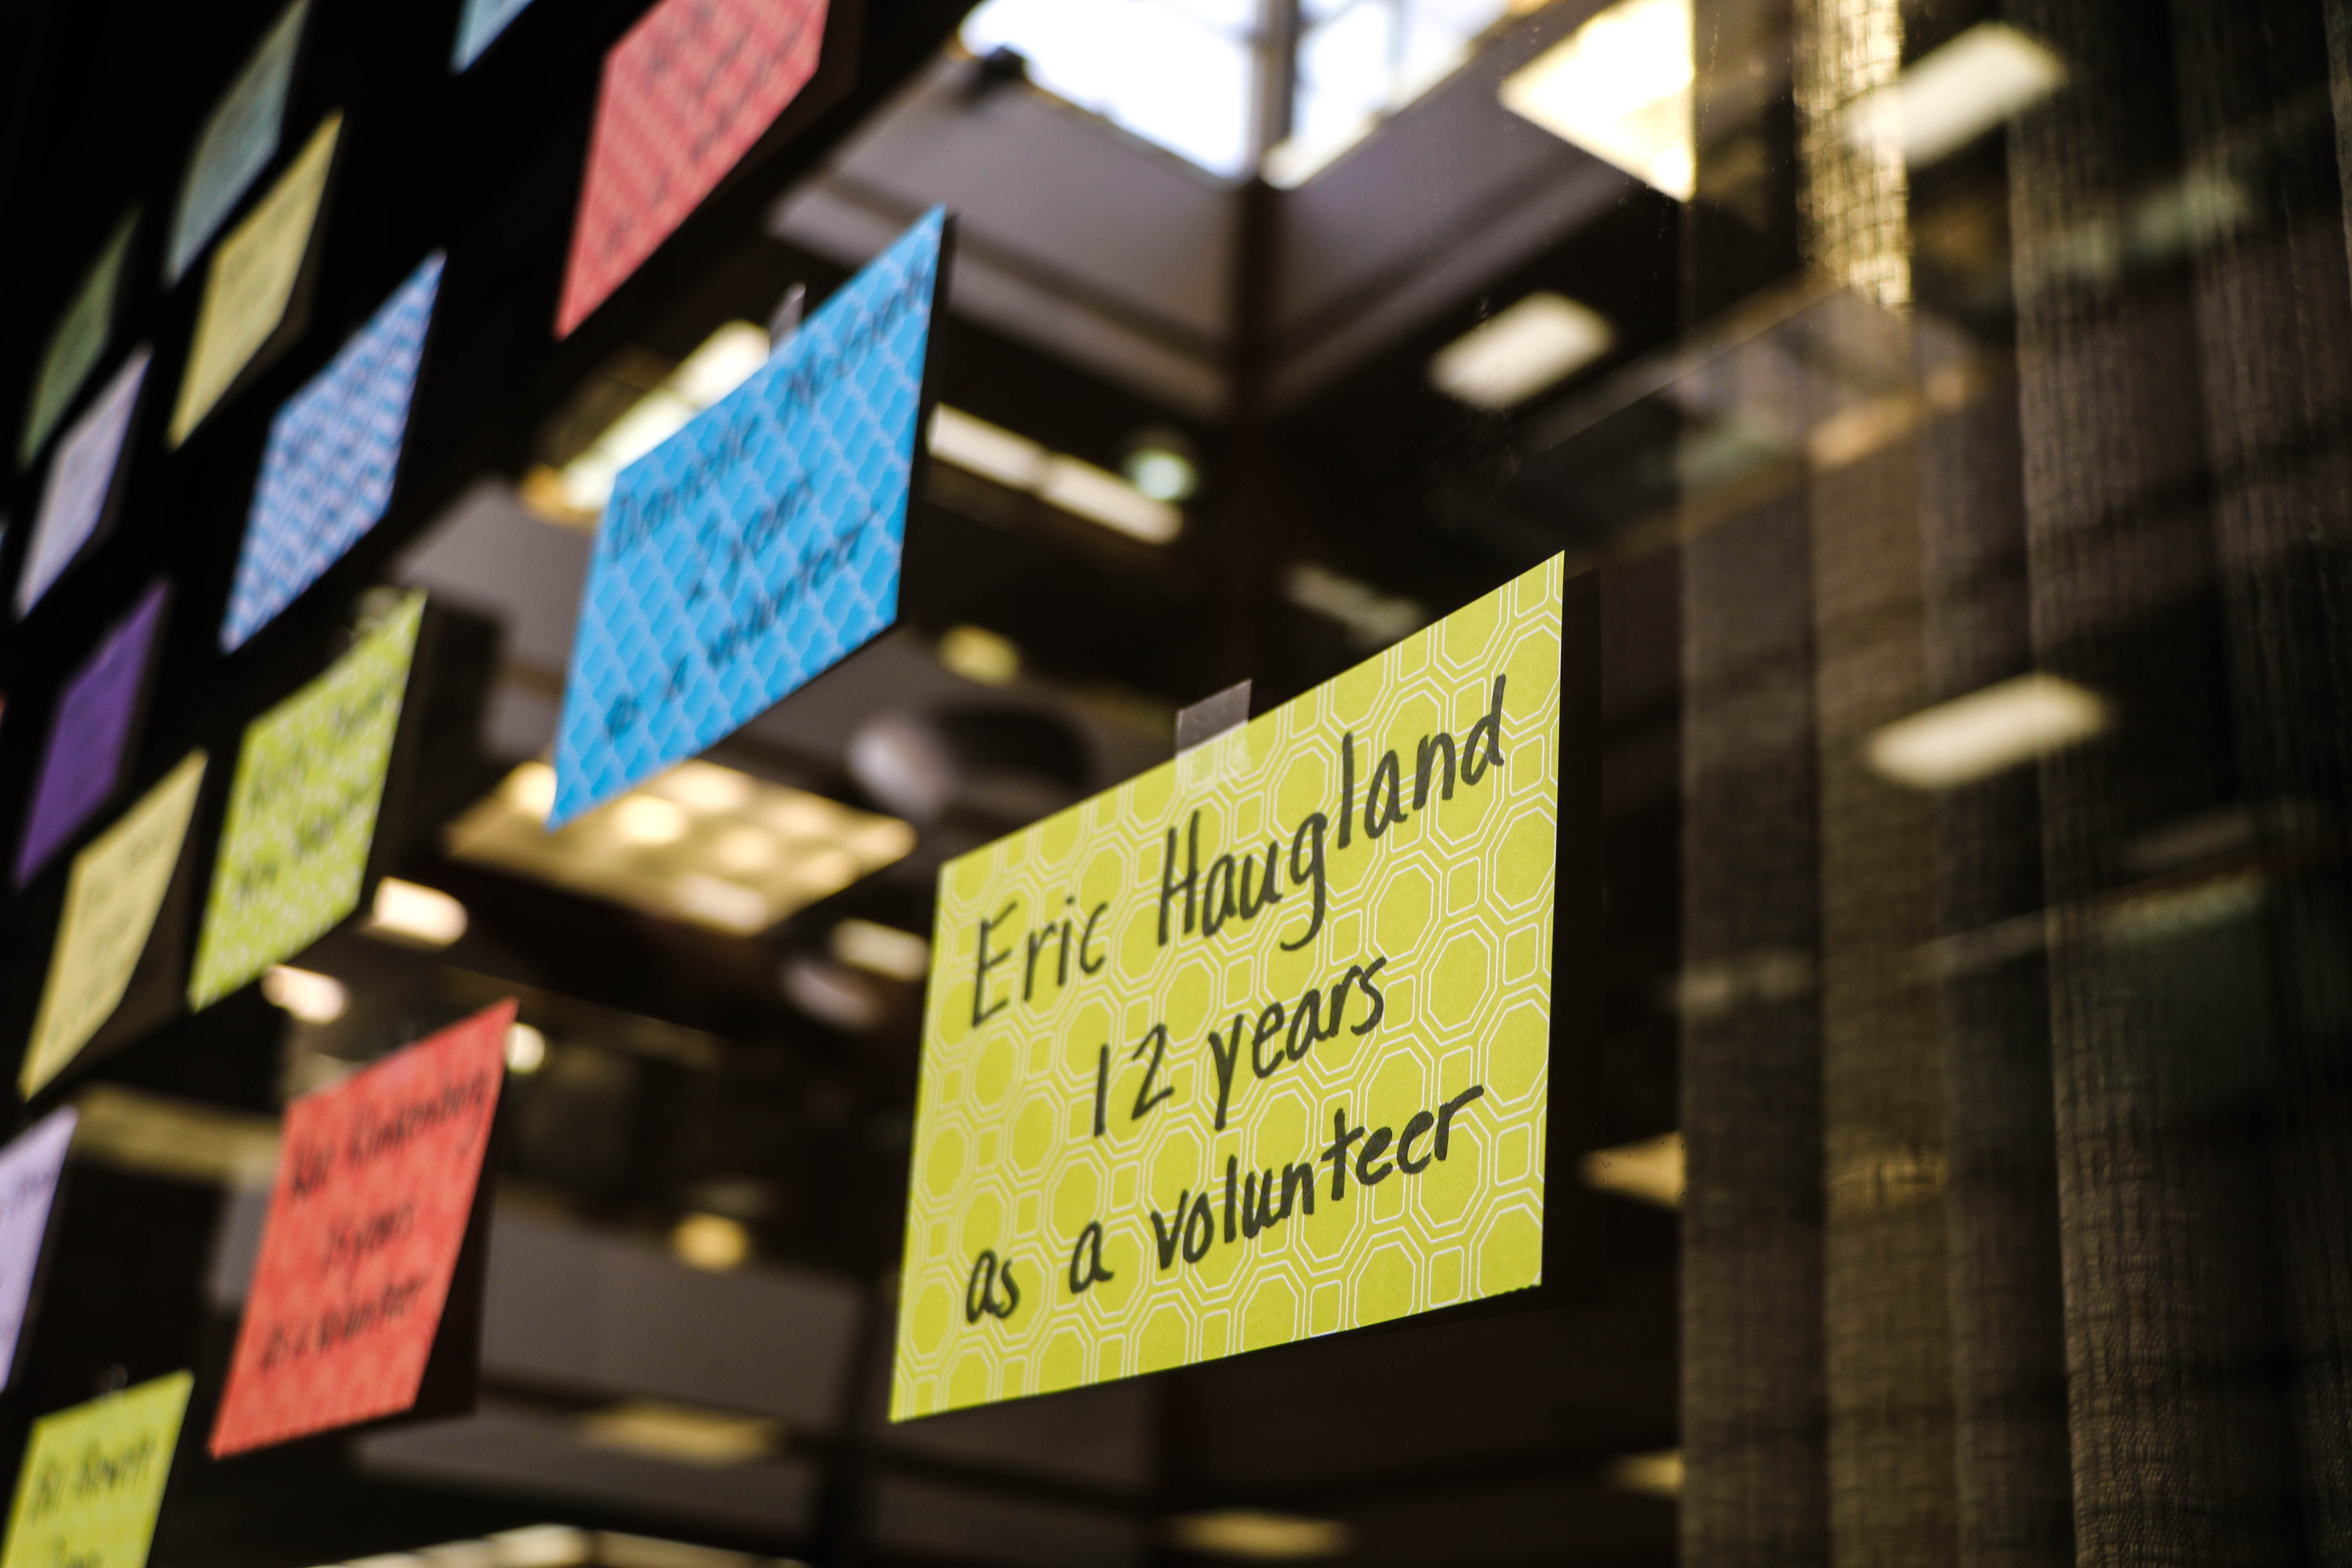 A sticky note on a window that reads, "Eric Haugland, 12 years as a volunteer"